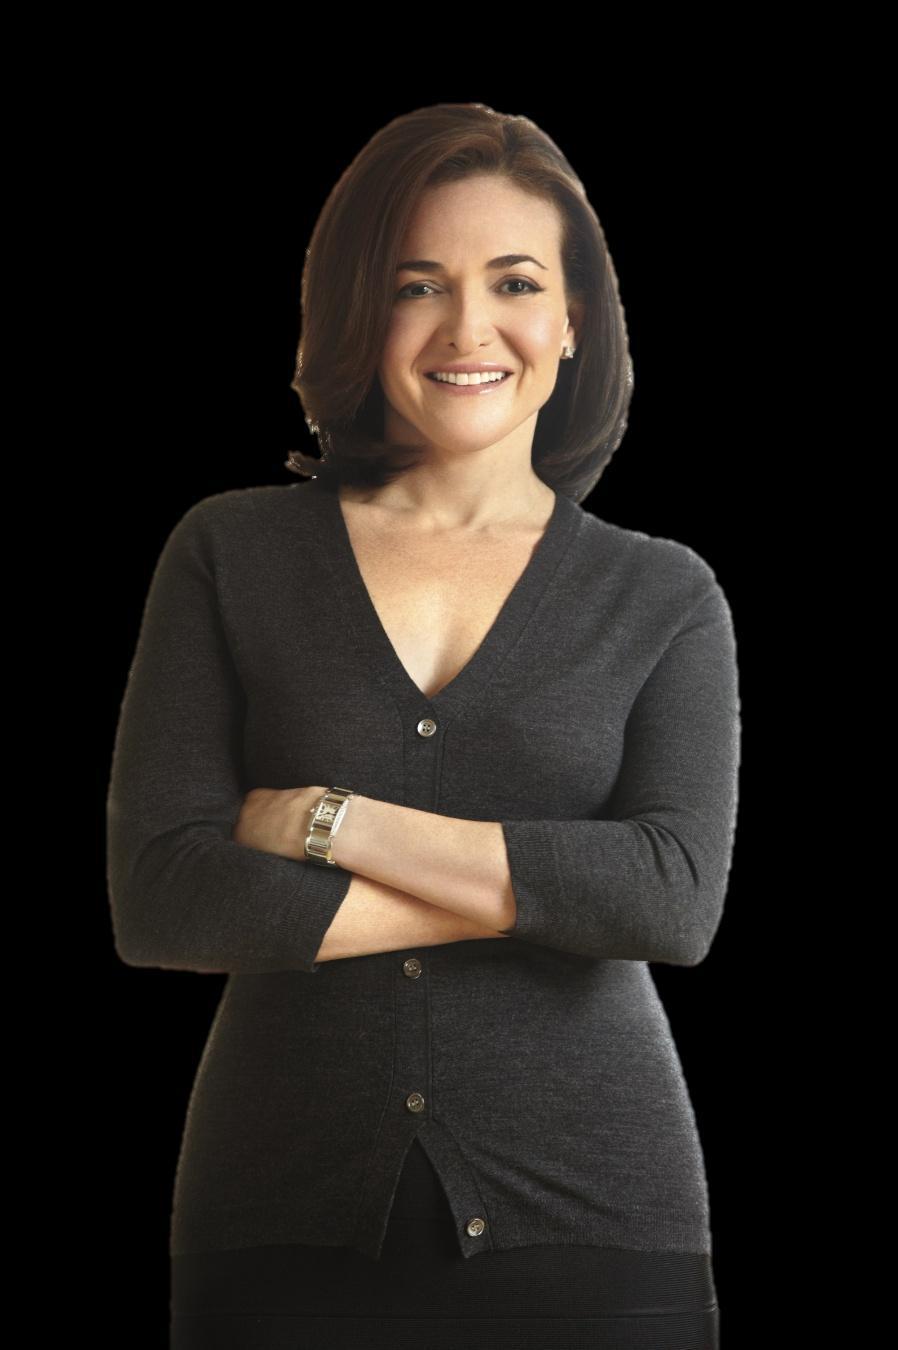 Why we have too few women leaders (run slide show - click on Sheryl for video) (TED Talks 2010) Sheryl Sandberg: Facebook COO looks at